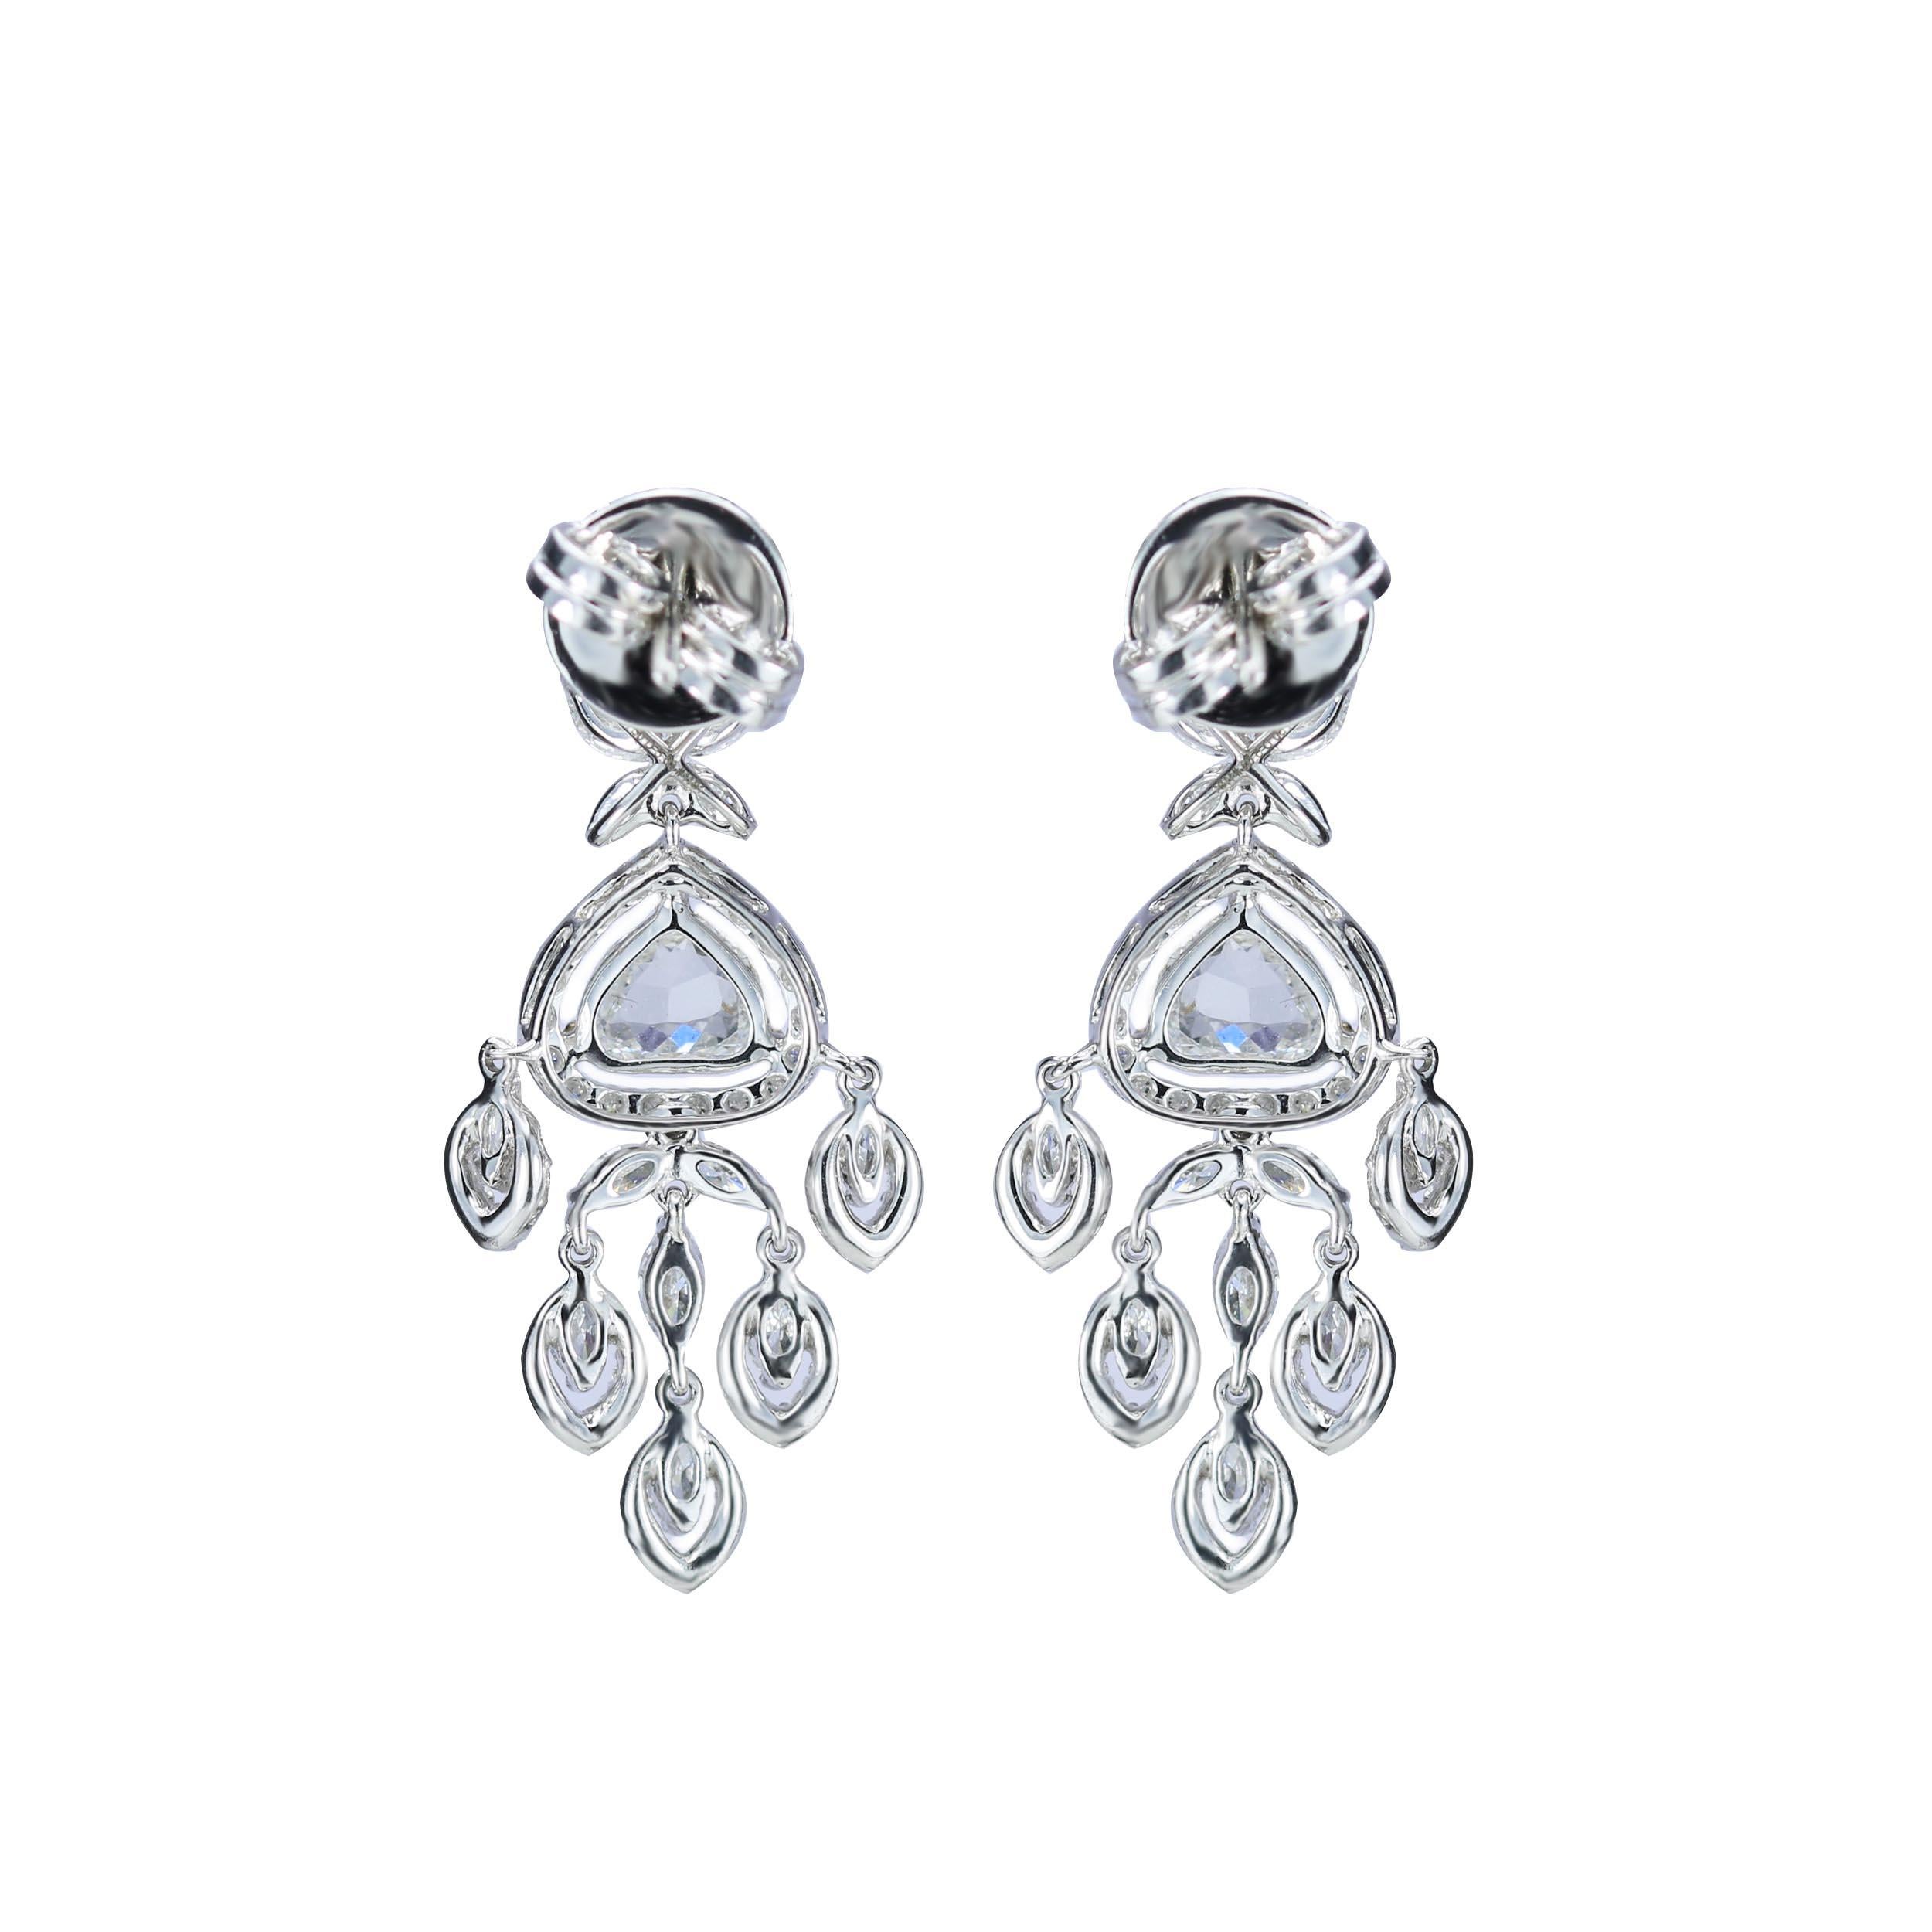 F-G/ VS-SI Marquise cut and Rosecut Diamond earrings

The aesthetic superiority of these art deco-inspired diamond earrings is unmatched. A smattering of F-G/ VS-SI trillion rosecut, brilliant round and marquise diamonds come together in an alluring